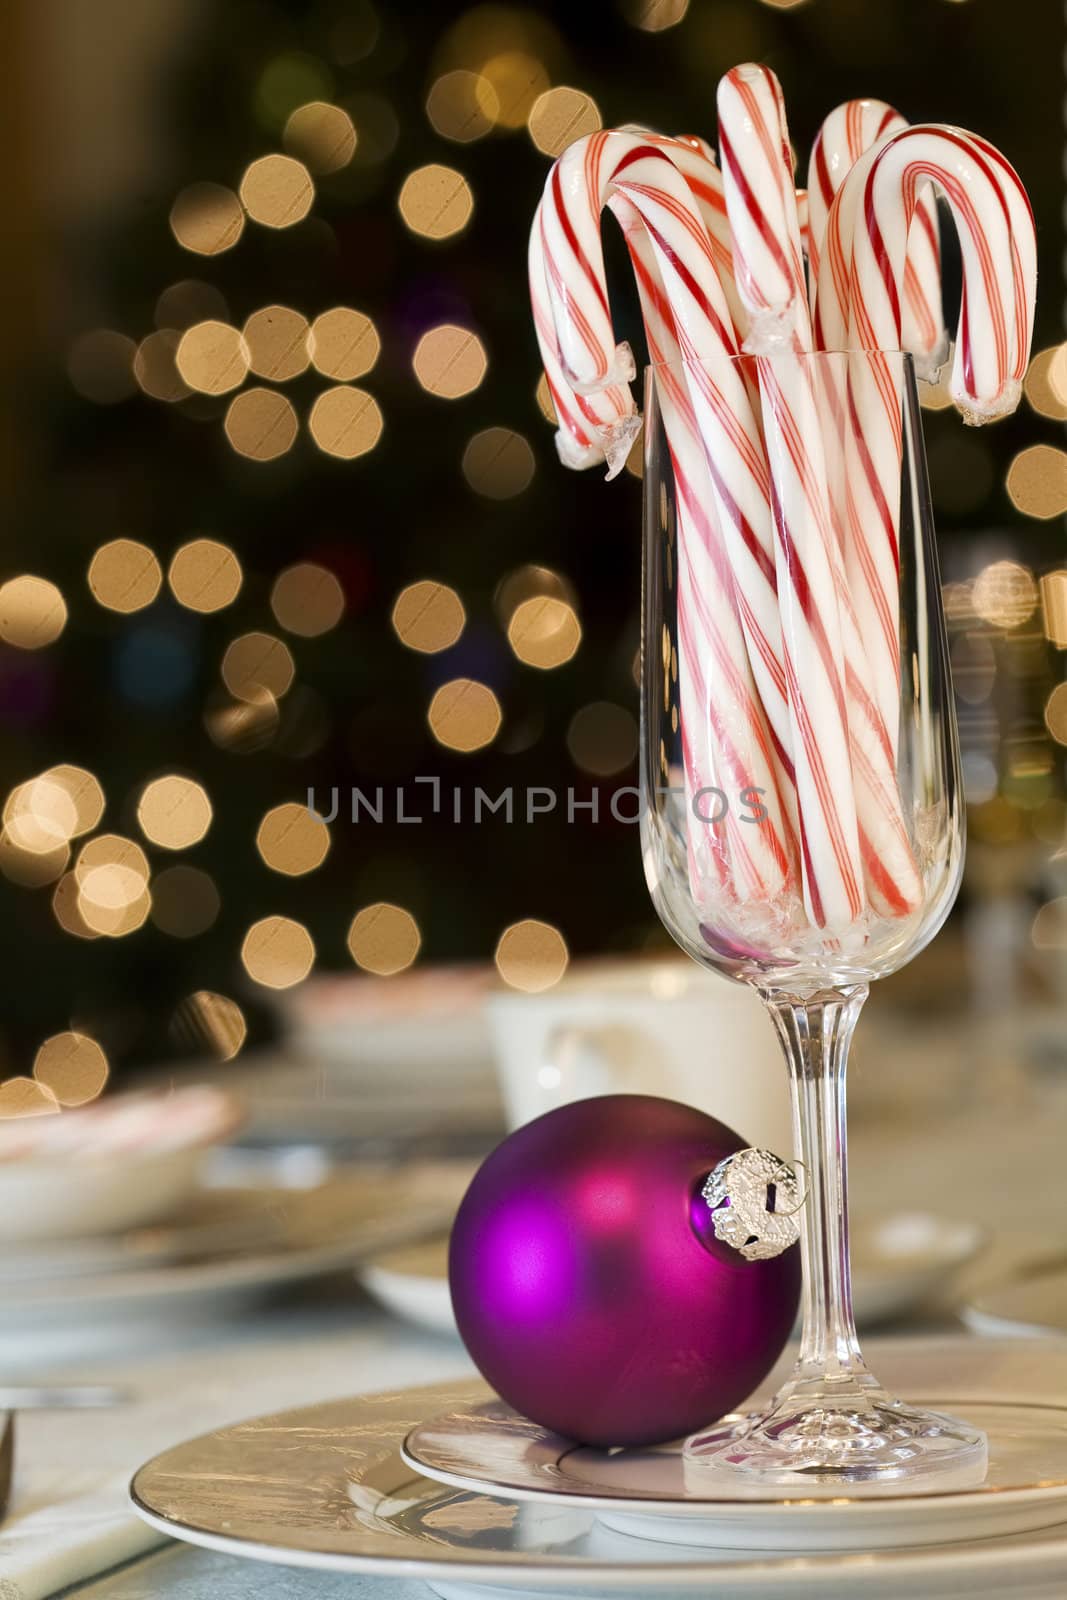 Candy canes and ornaments on Christmas dining table by jarenwicklund